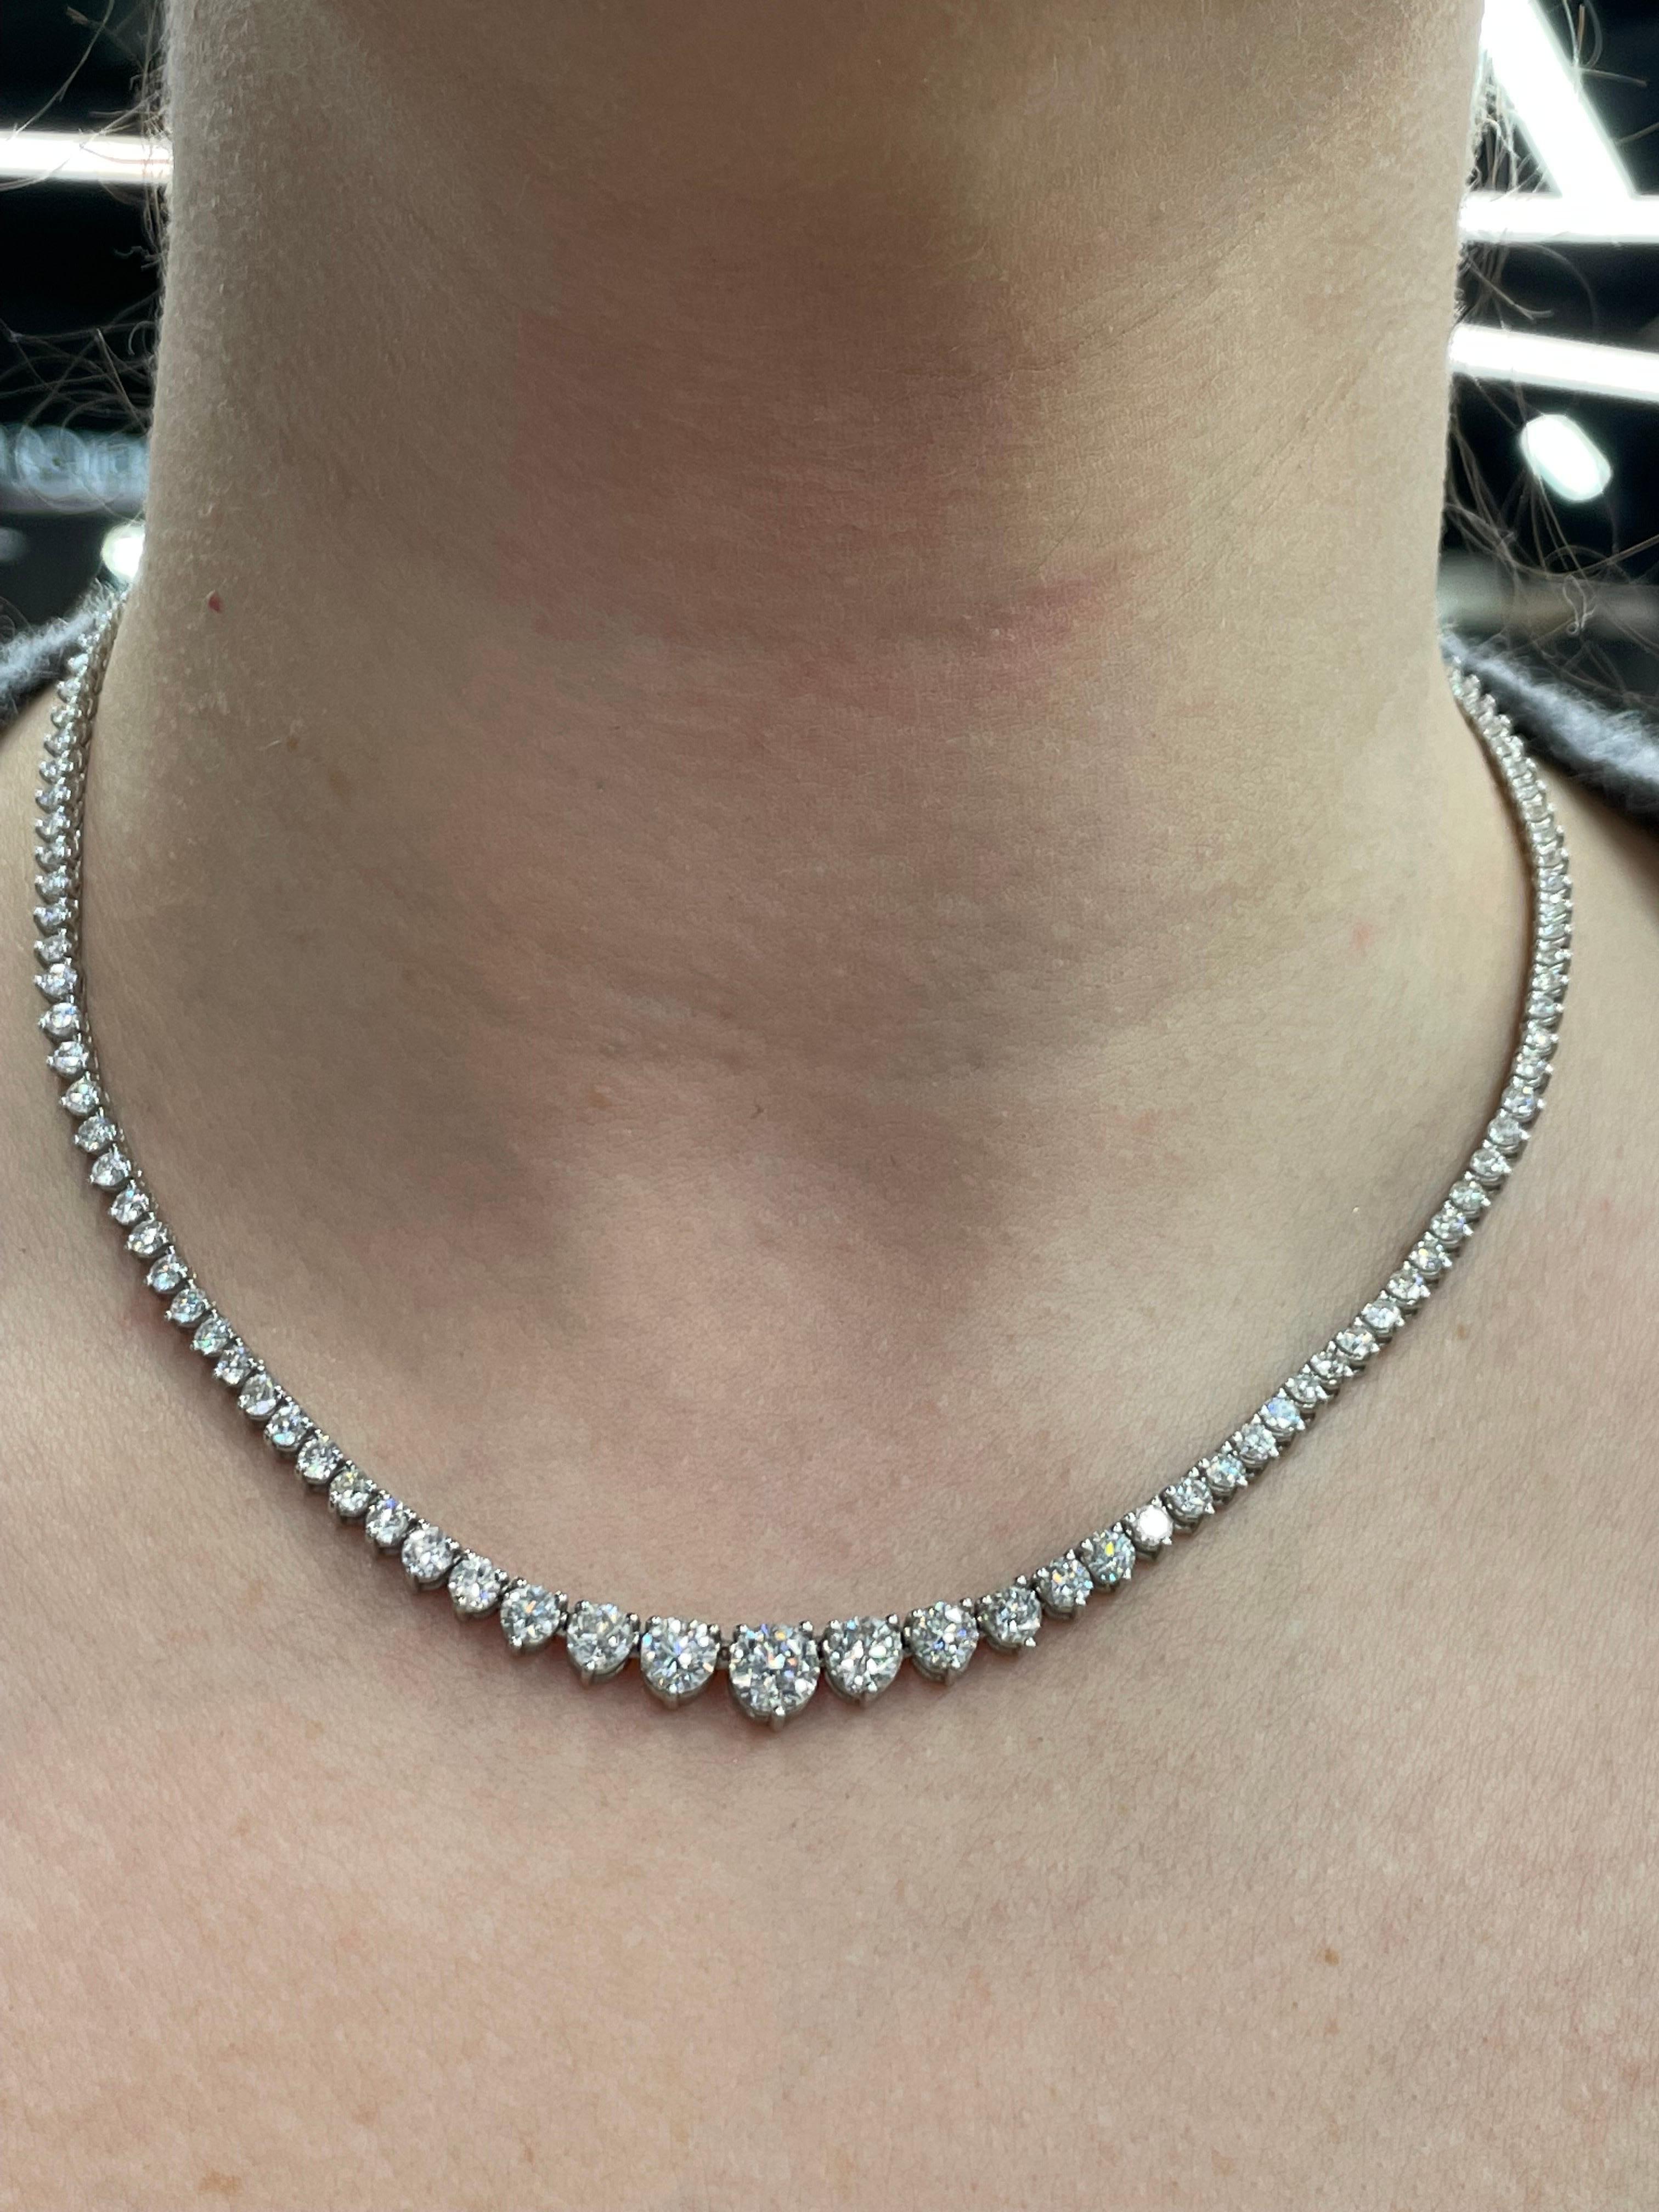 Diamond Riviere necklace featuring 153 round brilliants weighing 10.02 Carats, in a 3 prong 14 Karat White Gold.
Center Diamond 0.90 Points
Two Side Diamonds 0.71 Total Weight 
Color H-I
Clarity SI-SI3

We manufacture Straight Line & Riviere